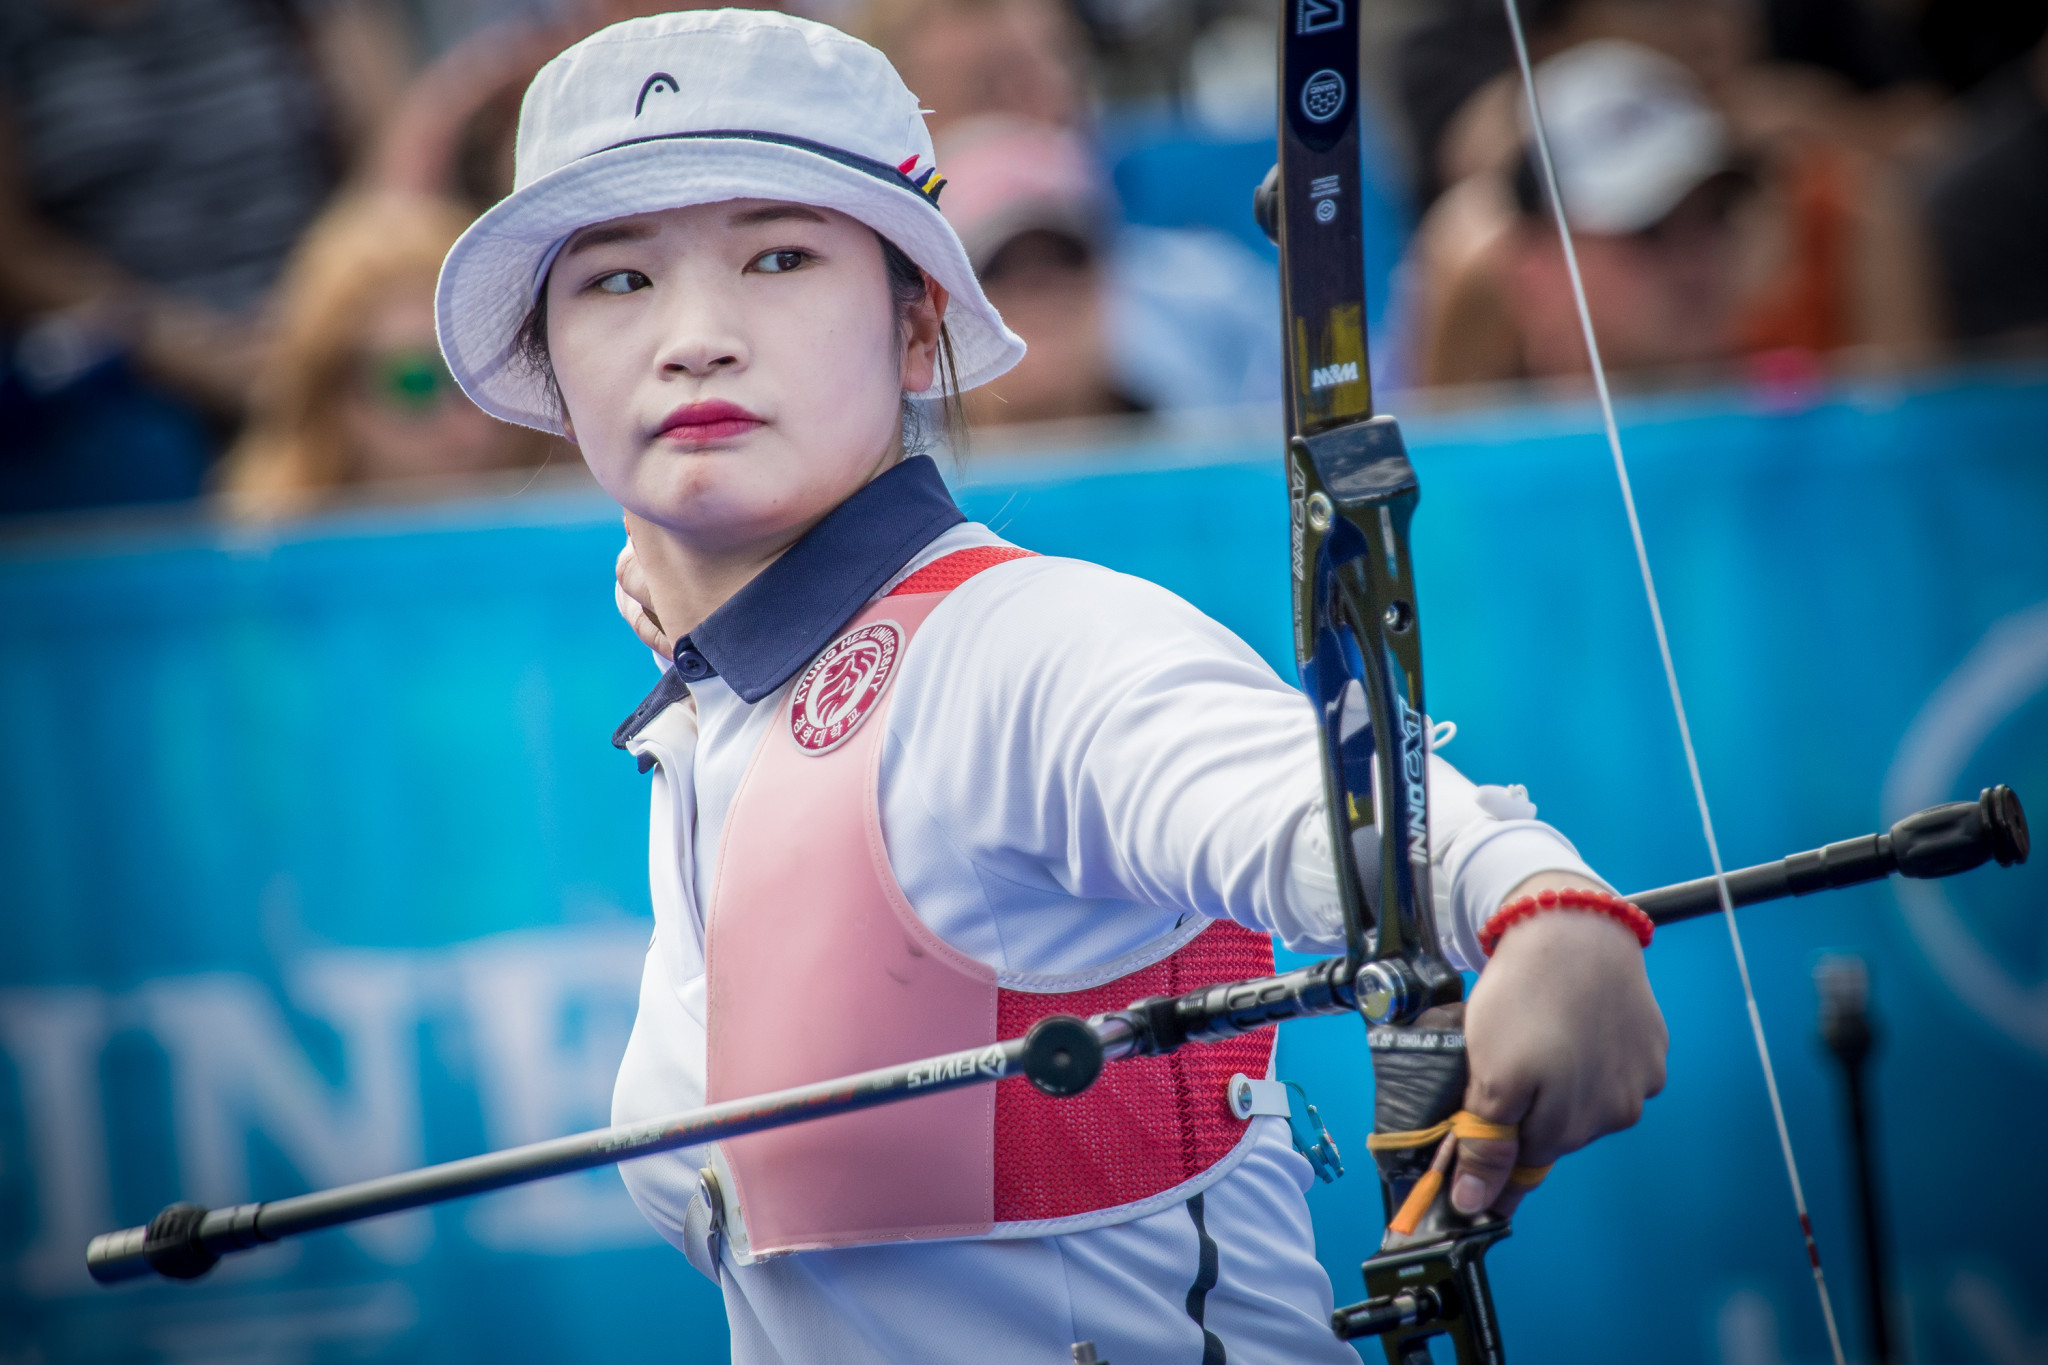 Kang Chae Young beat 14-year-old Casey Kaufhold to win the Indoor Archery World Series event in Nimes ©Getty Images